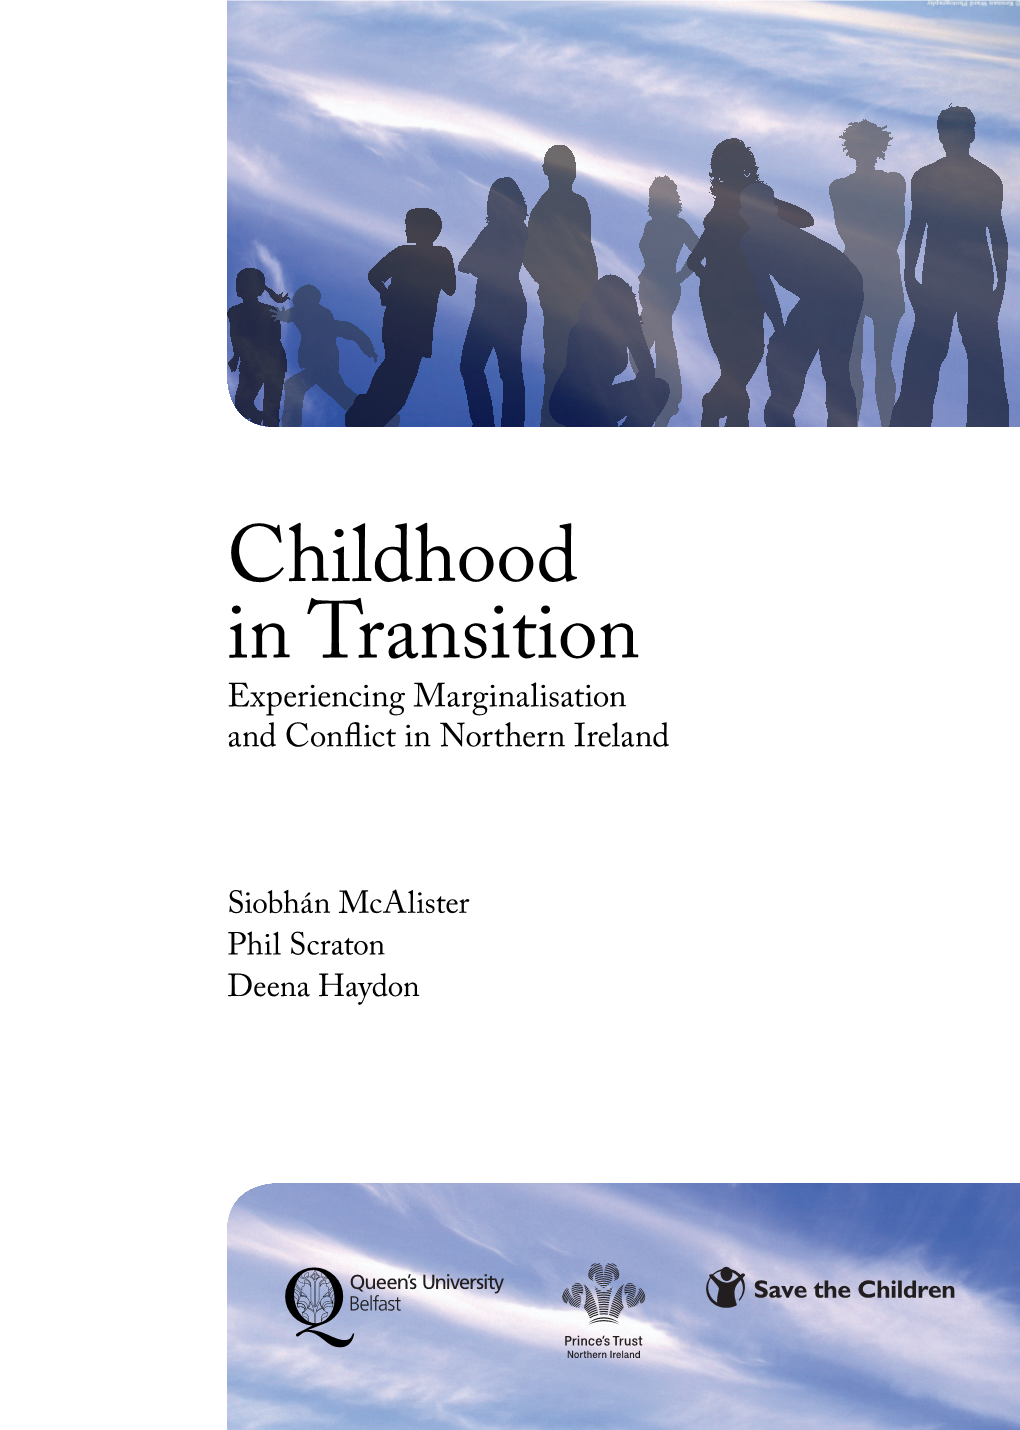 Childhood in Transition